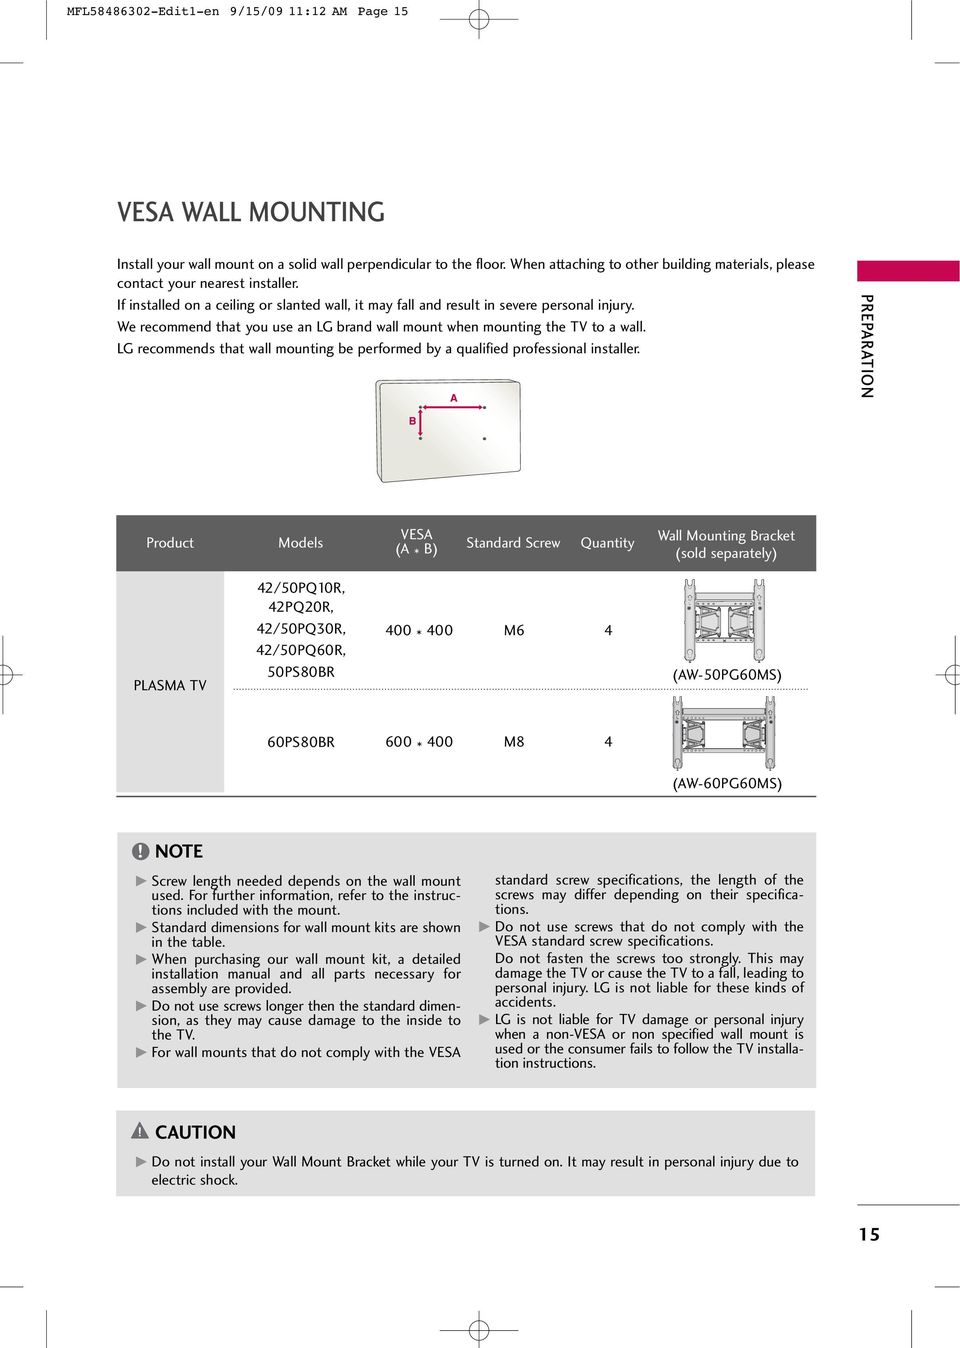 We recommend that you use an LG brand wall mount when mounting the TV to a wall. LG recommends that wall mounting be performed by a qualified professional installer.